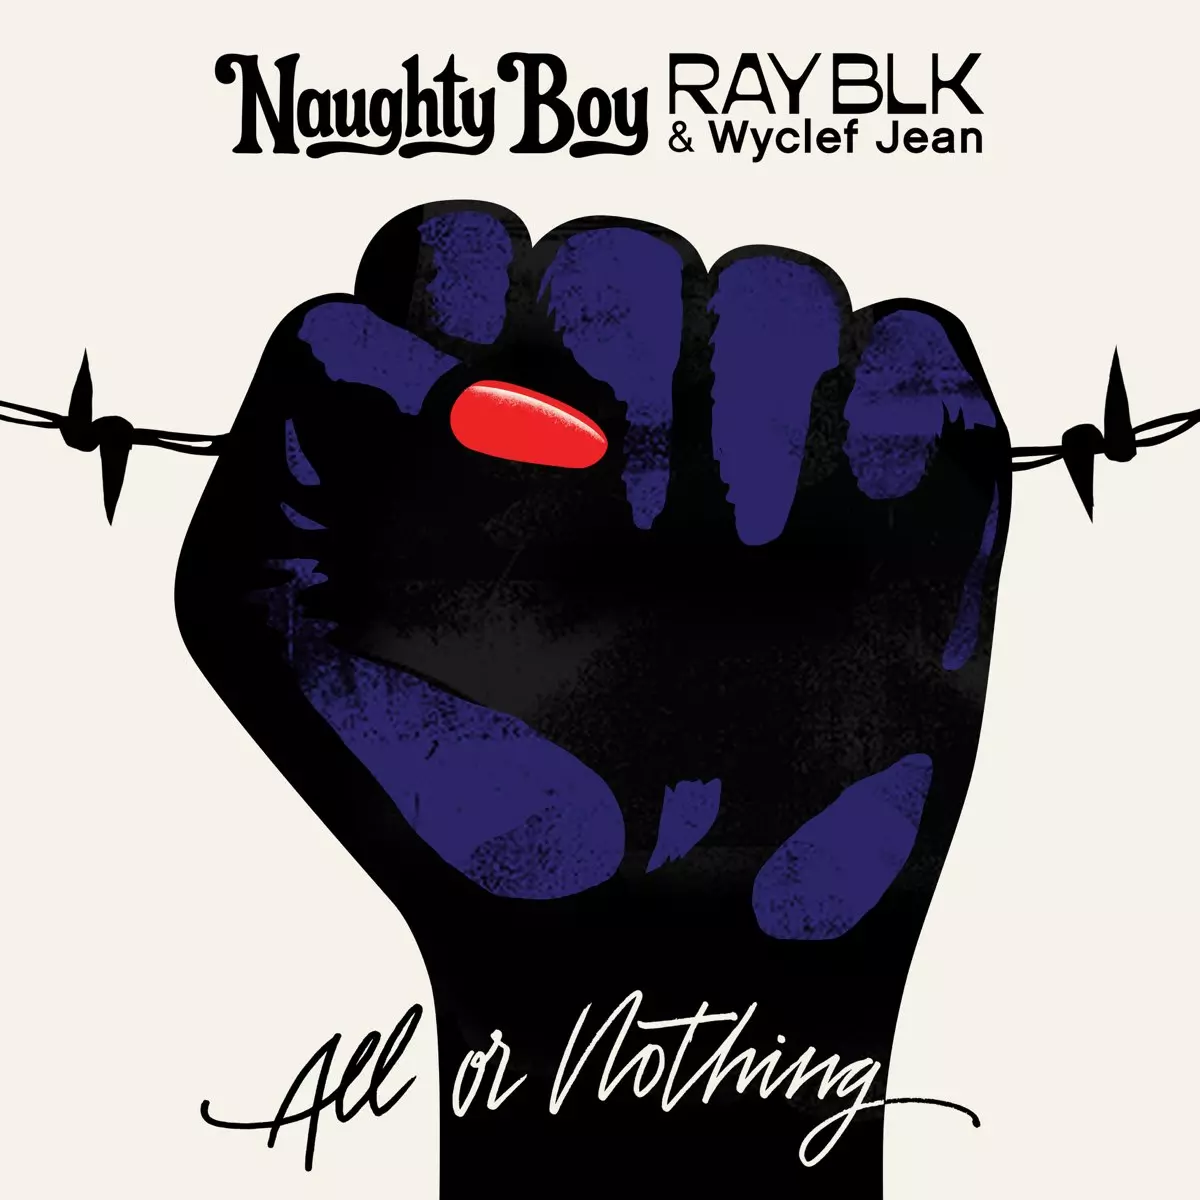 All Or Nothing - Single by Naughty Boy, RAY BLK & Wyclef Jean on Apple Music